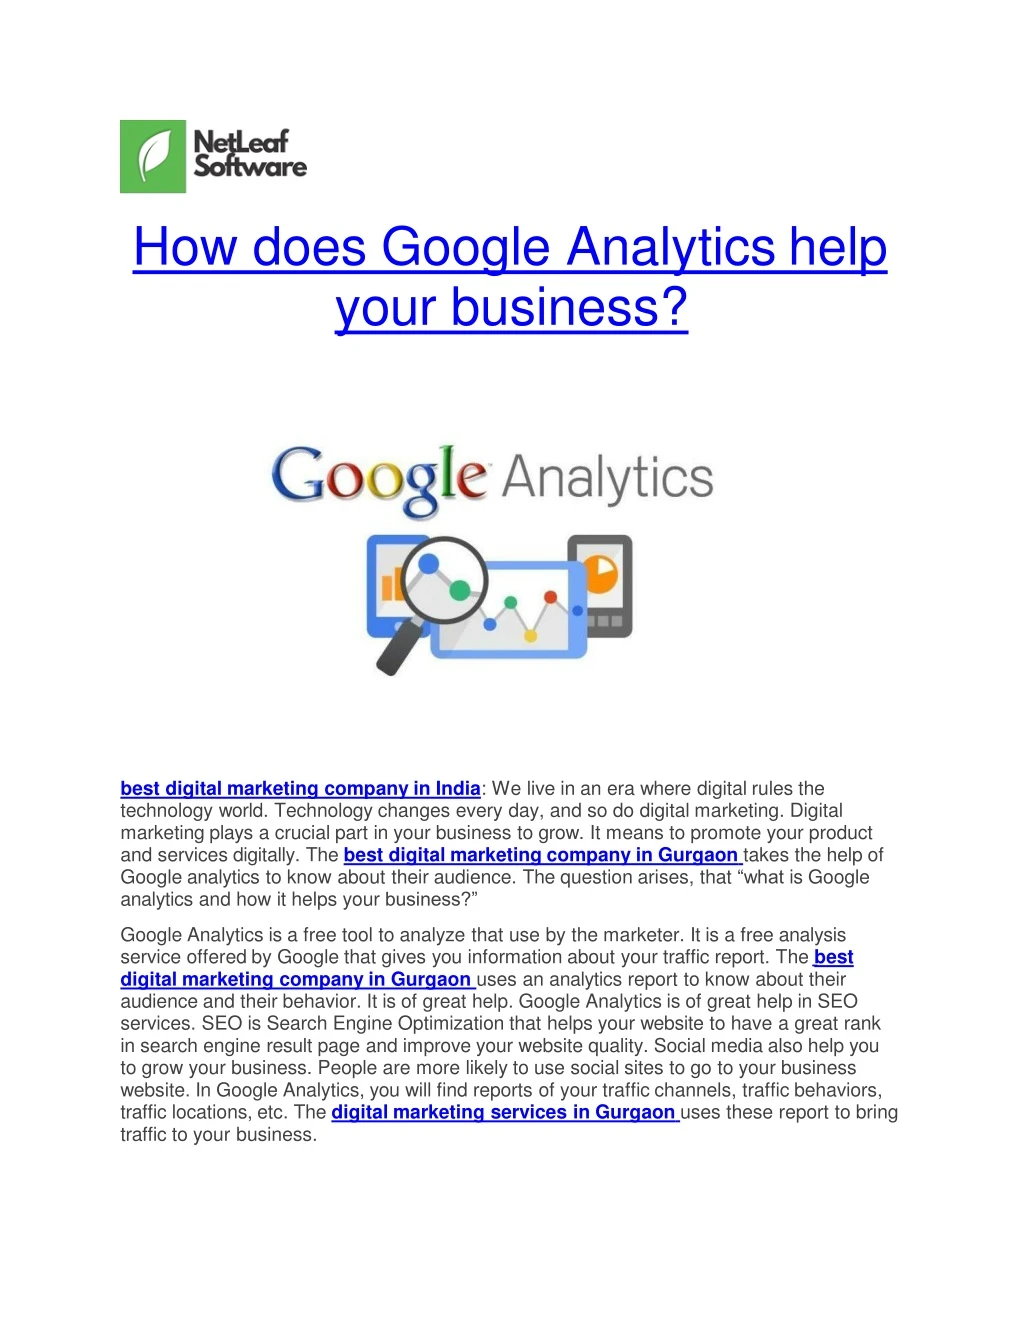 how does google analytics help your business